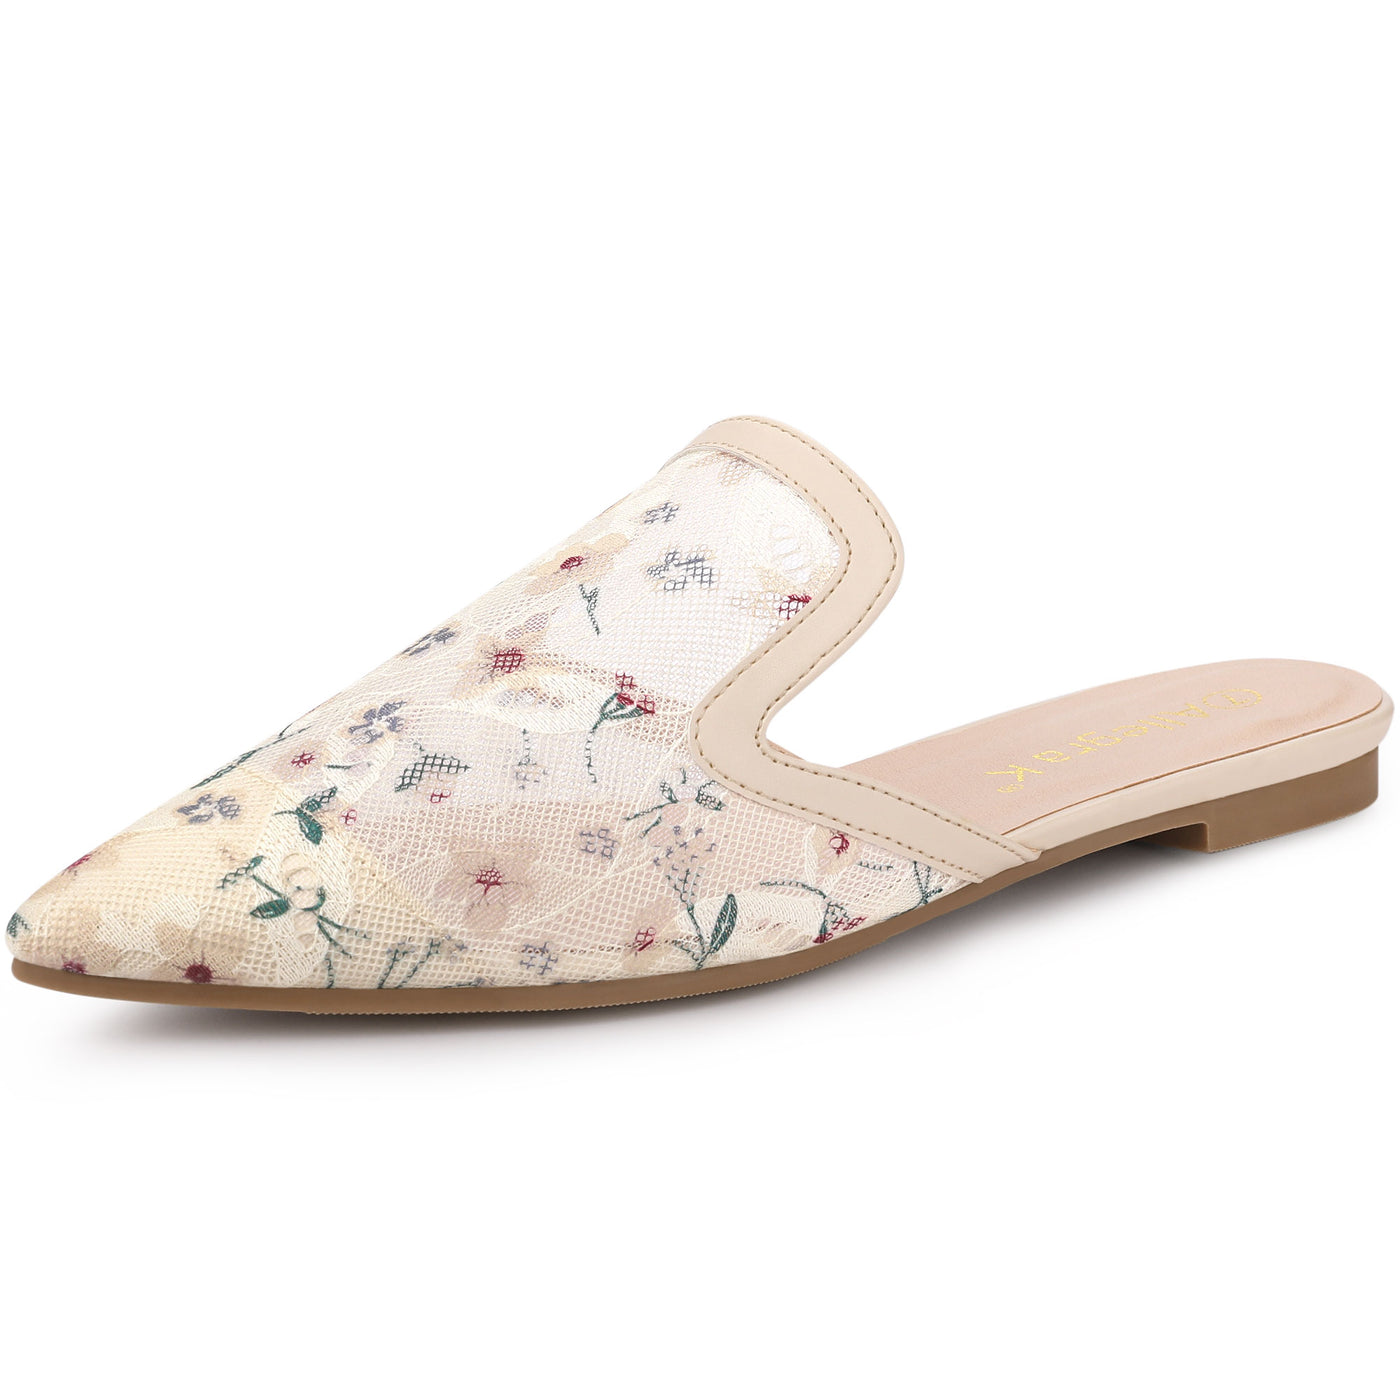 Allegra K Pointed Toe Floral Embroidery Flats Mules